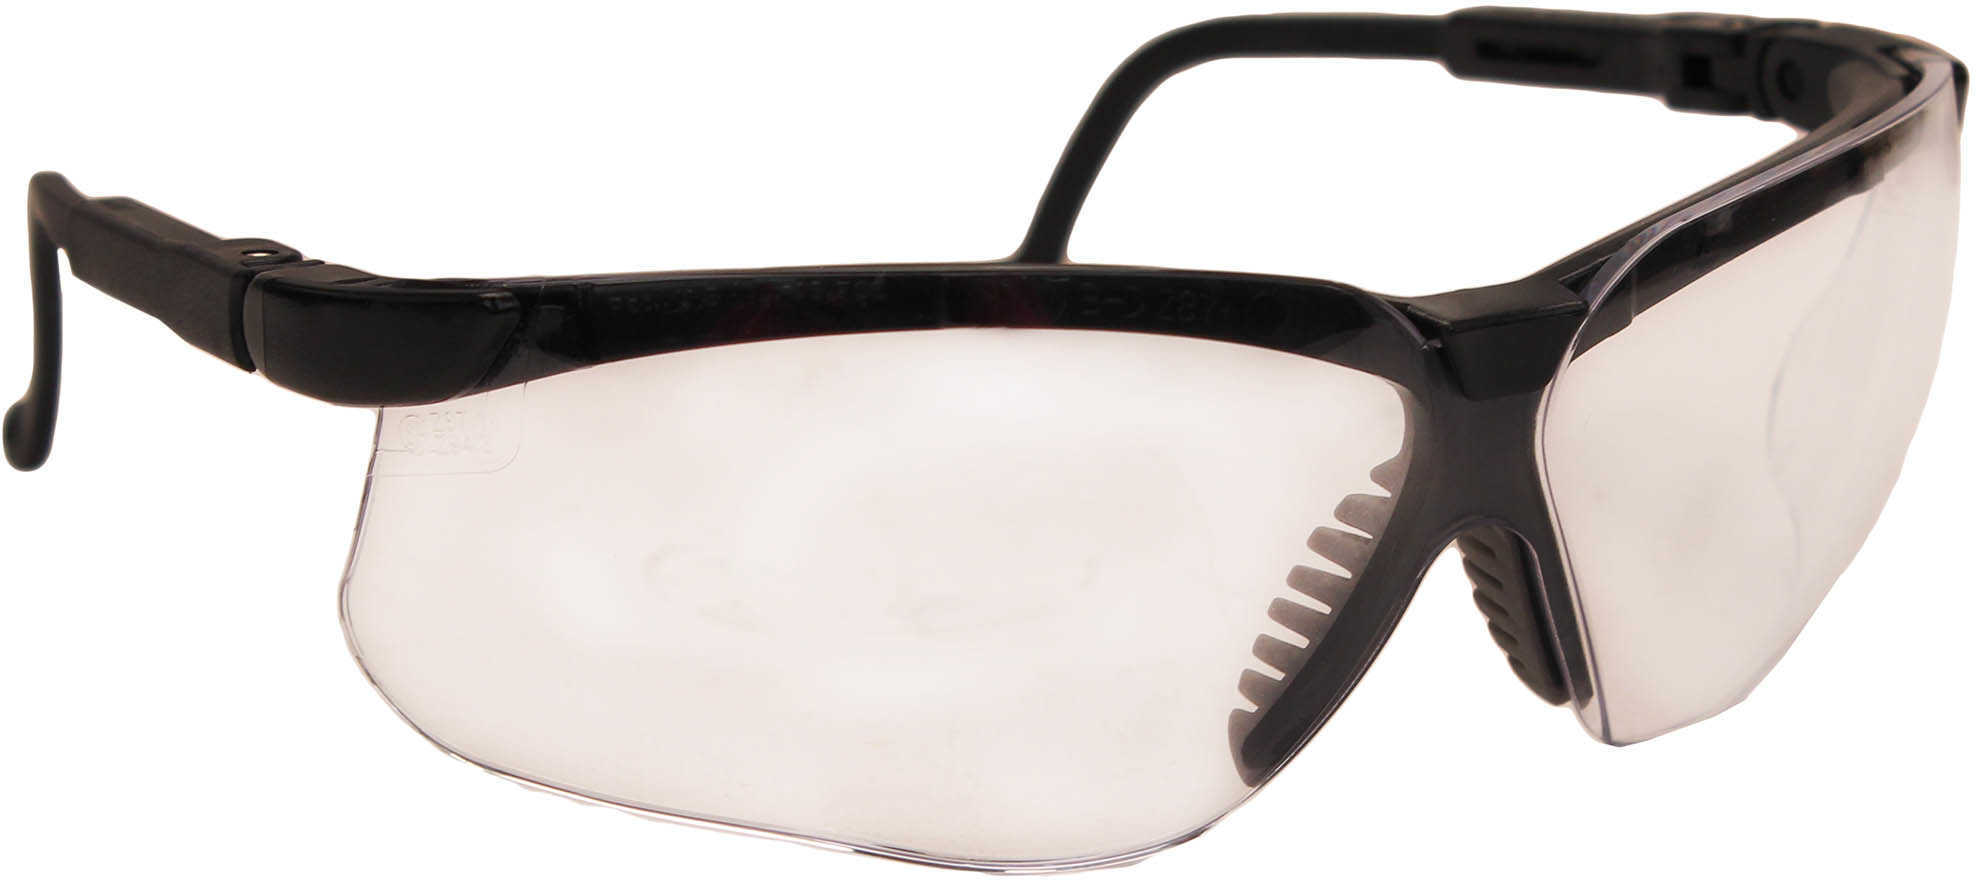 Howard Leight Genesis Safety/Shooting Glasses With Clear Lens & Black Frame Md: R03570